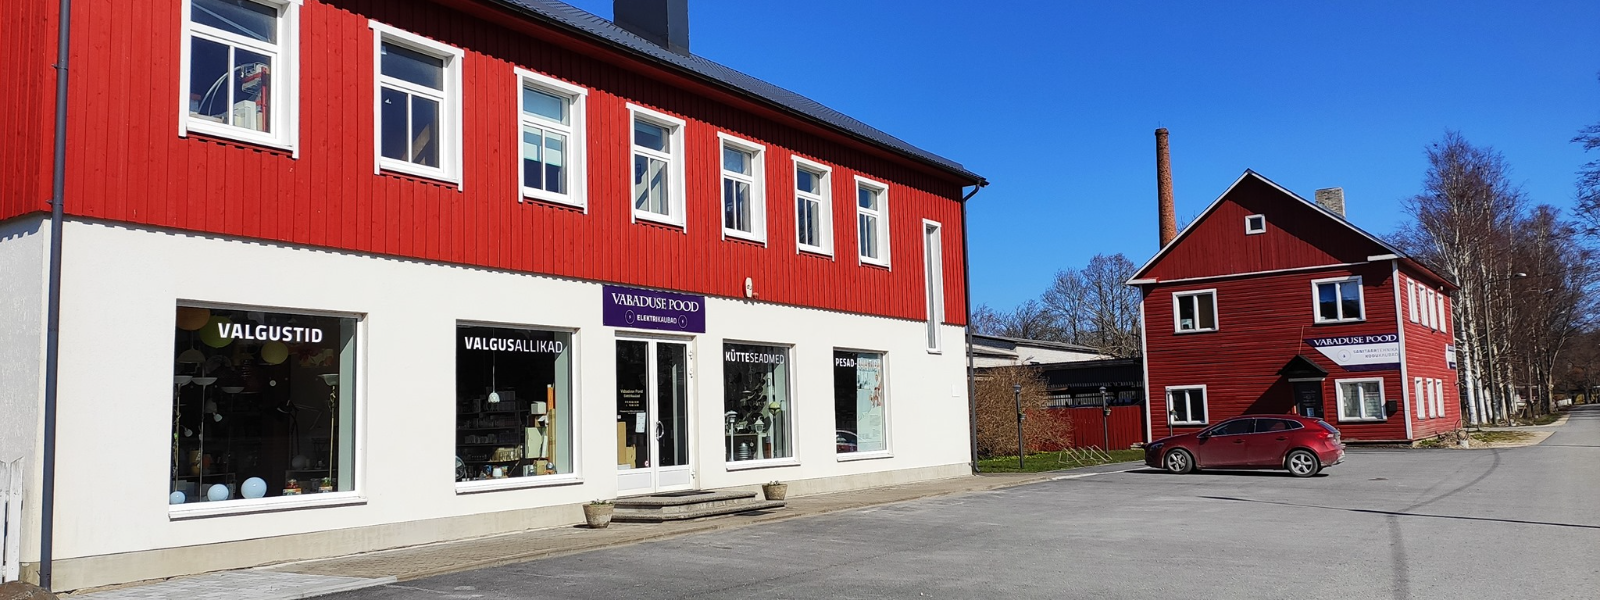 Retail sale of sanitary and water supply equipment and supplies in Kärdla